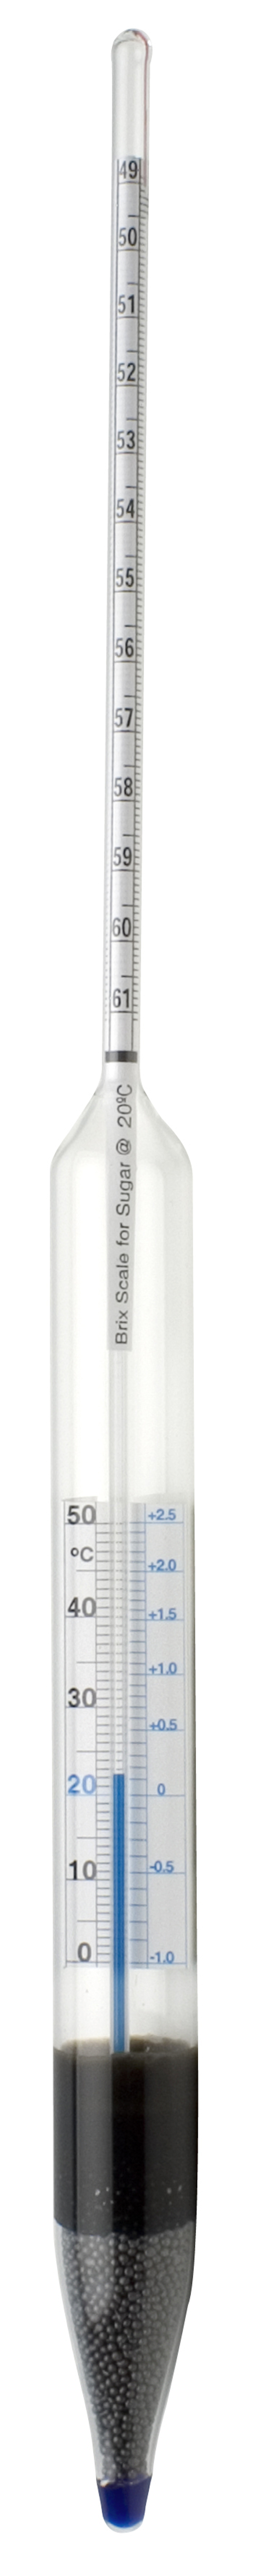 SP Bel-Art, H-B DURAC Safety 9/21 Degree Brix Sugar Scale Combined Form Thermo-Hydrometer